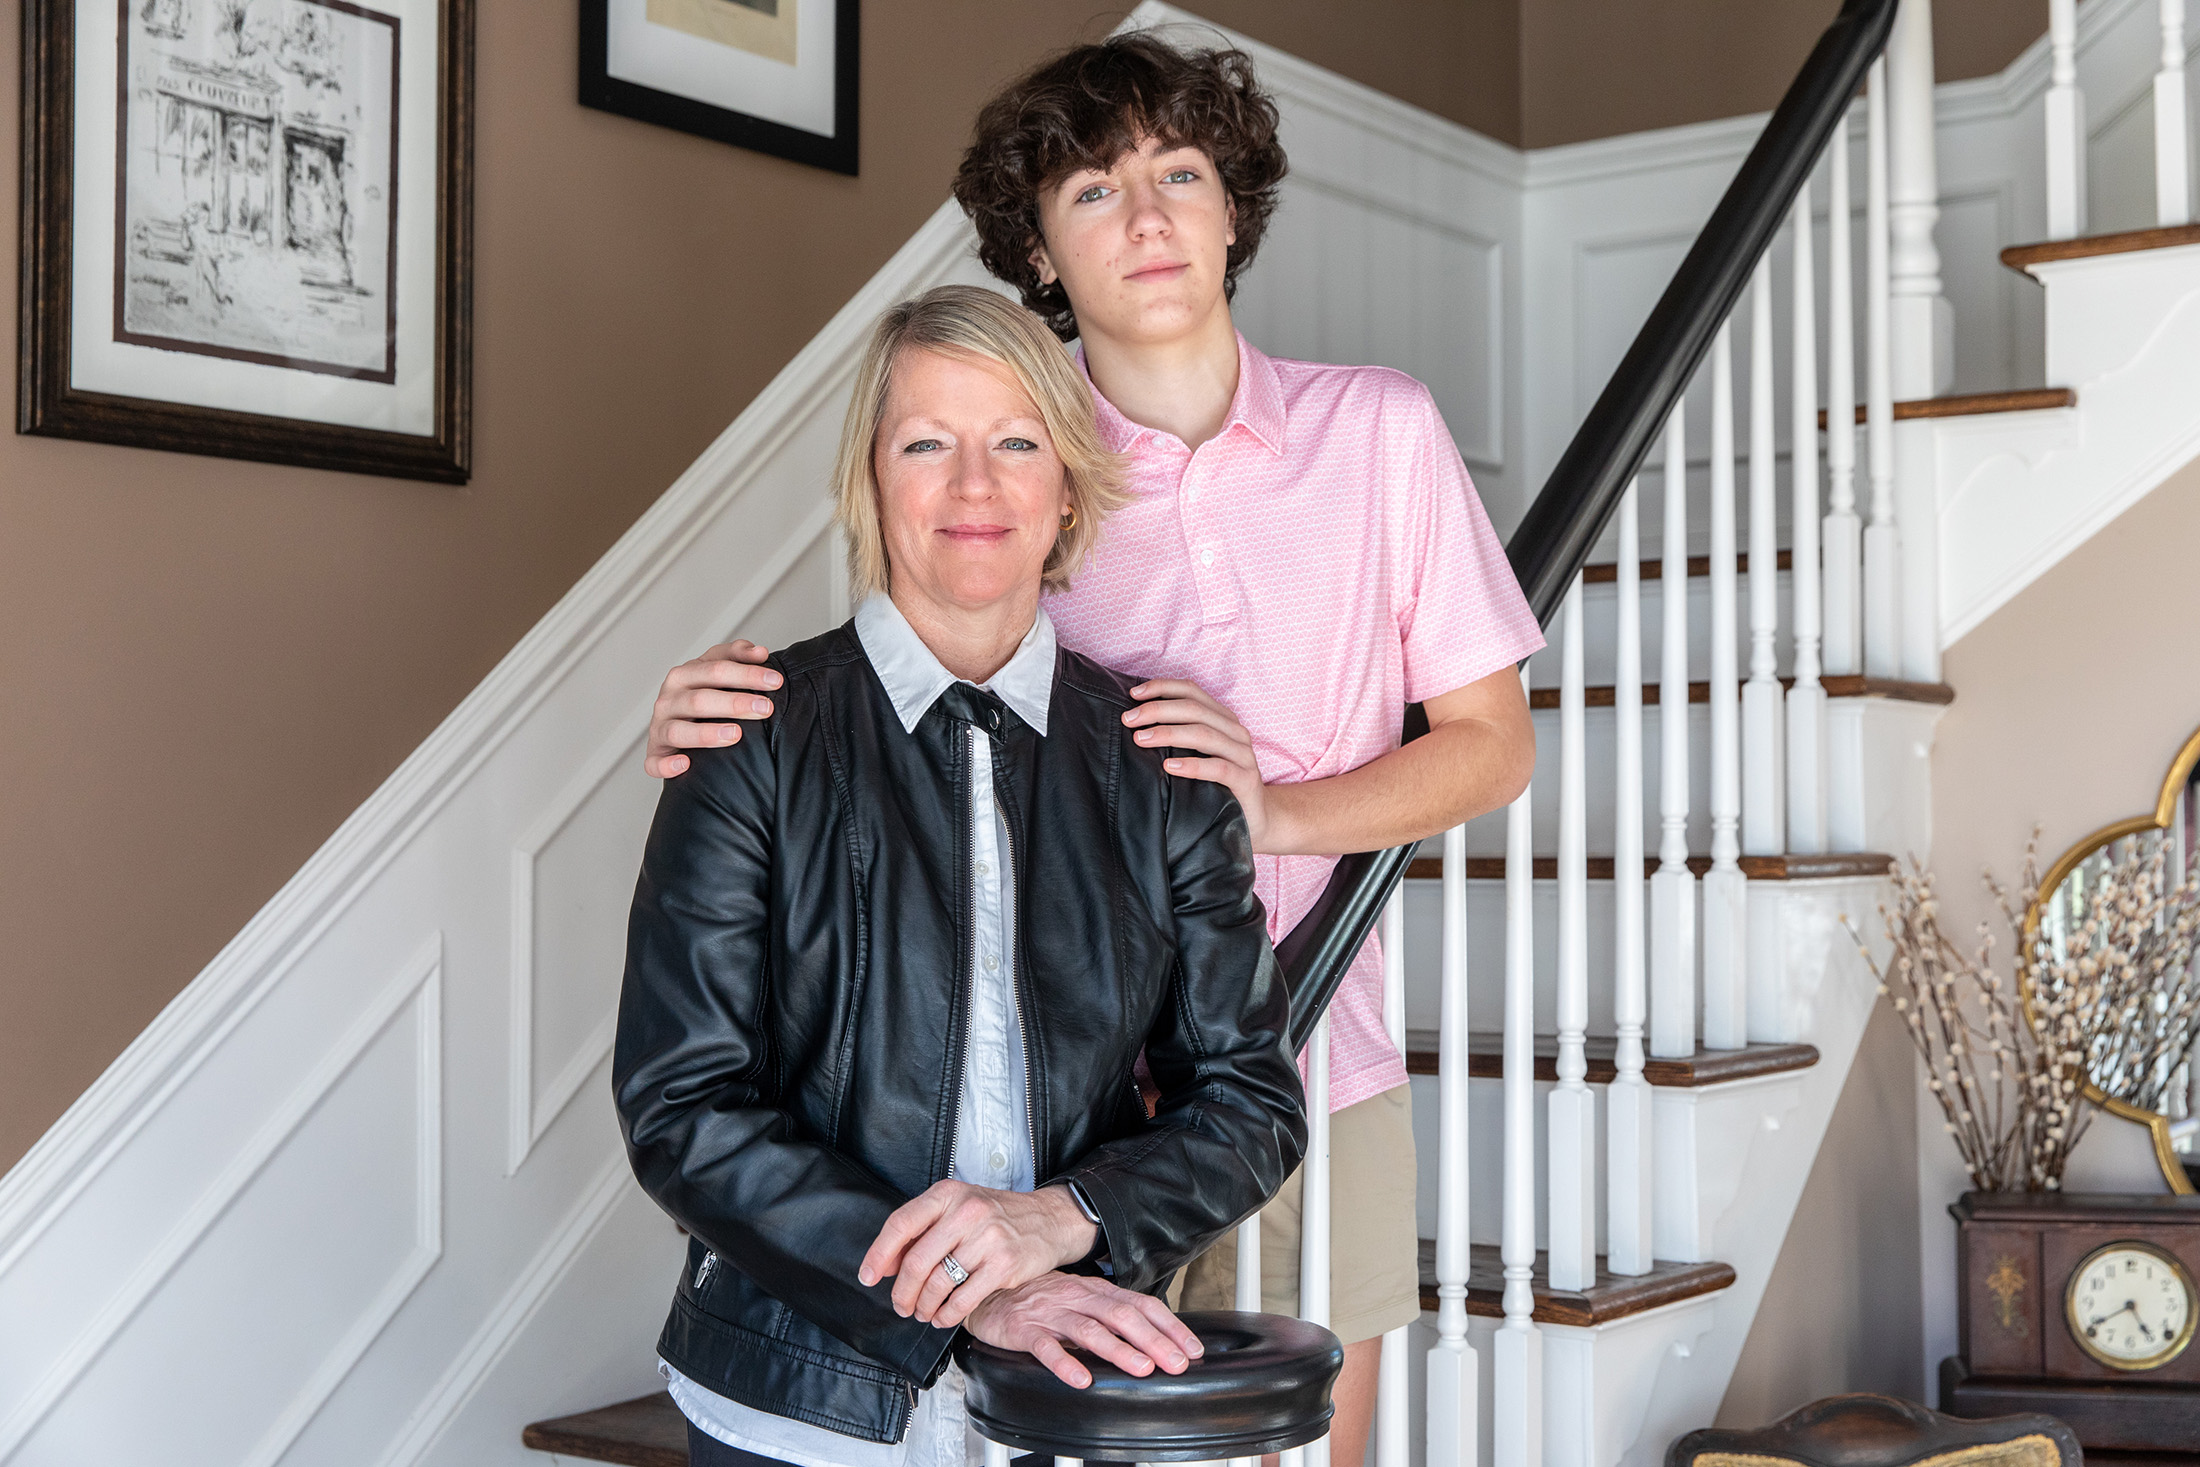 Lisa Brown and her son, William, at their home in Raleigh, North Carolina.